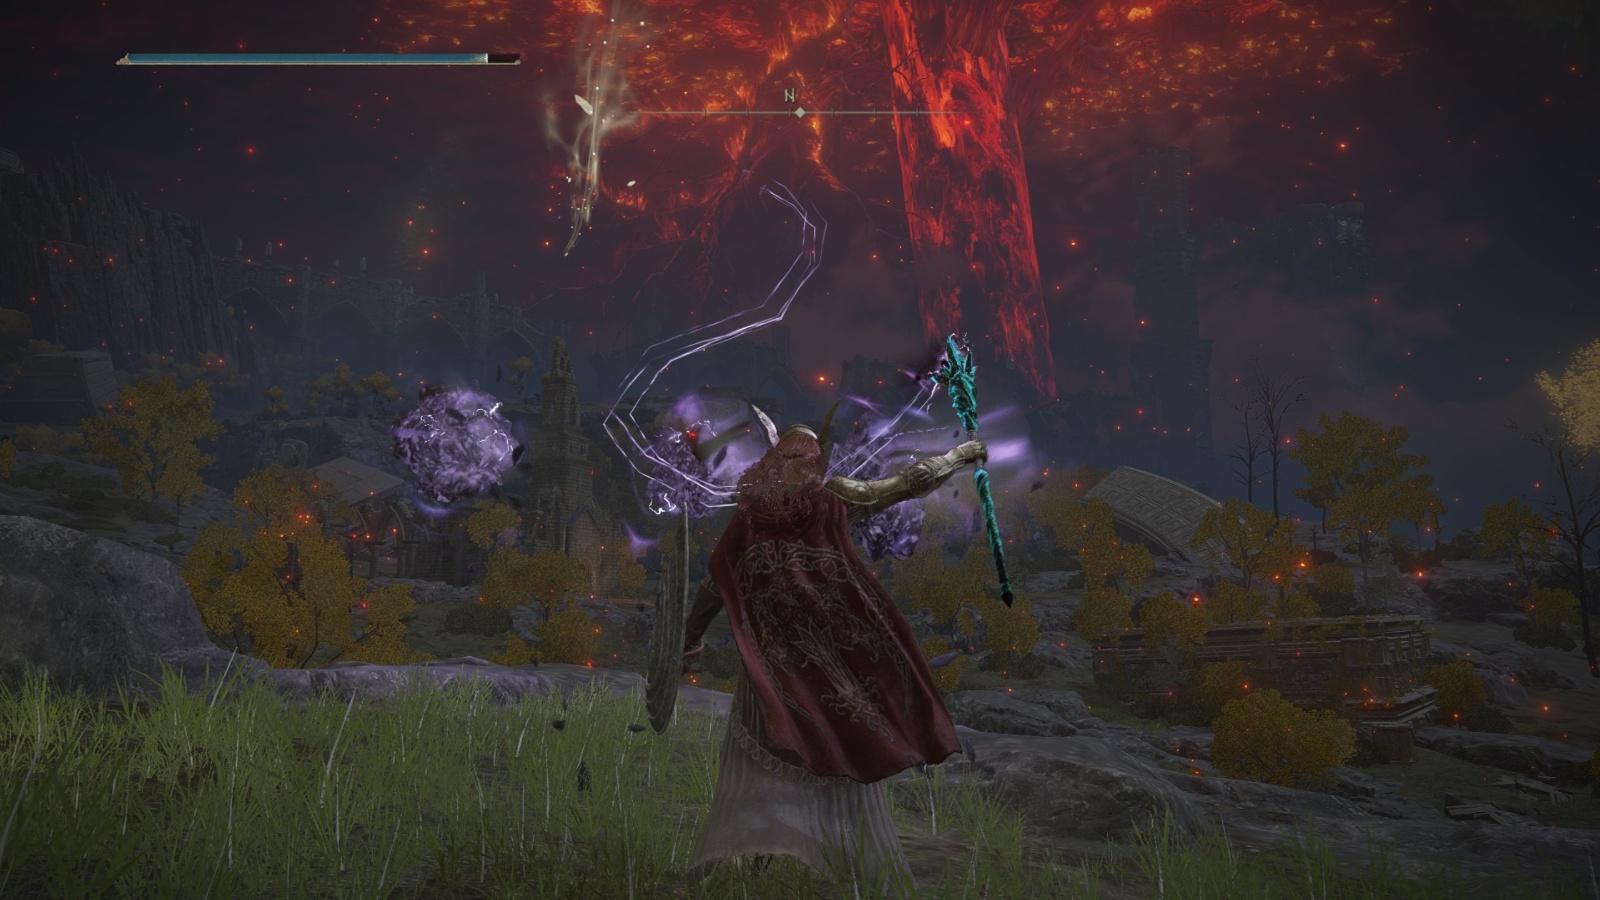 A screenshot from the game Elden Ring